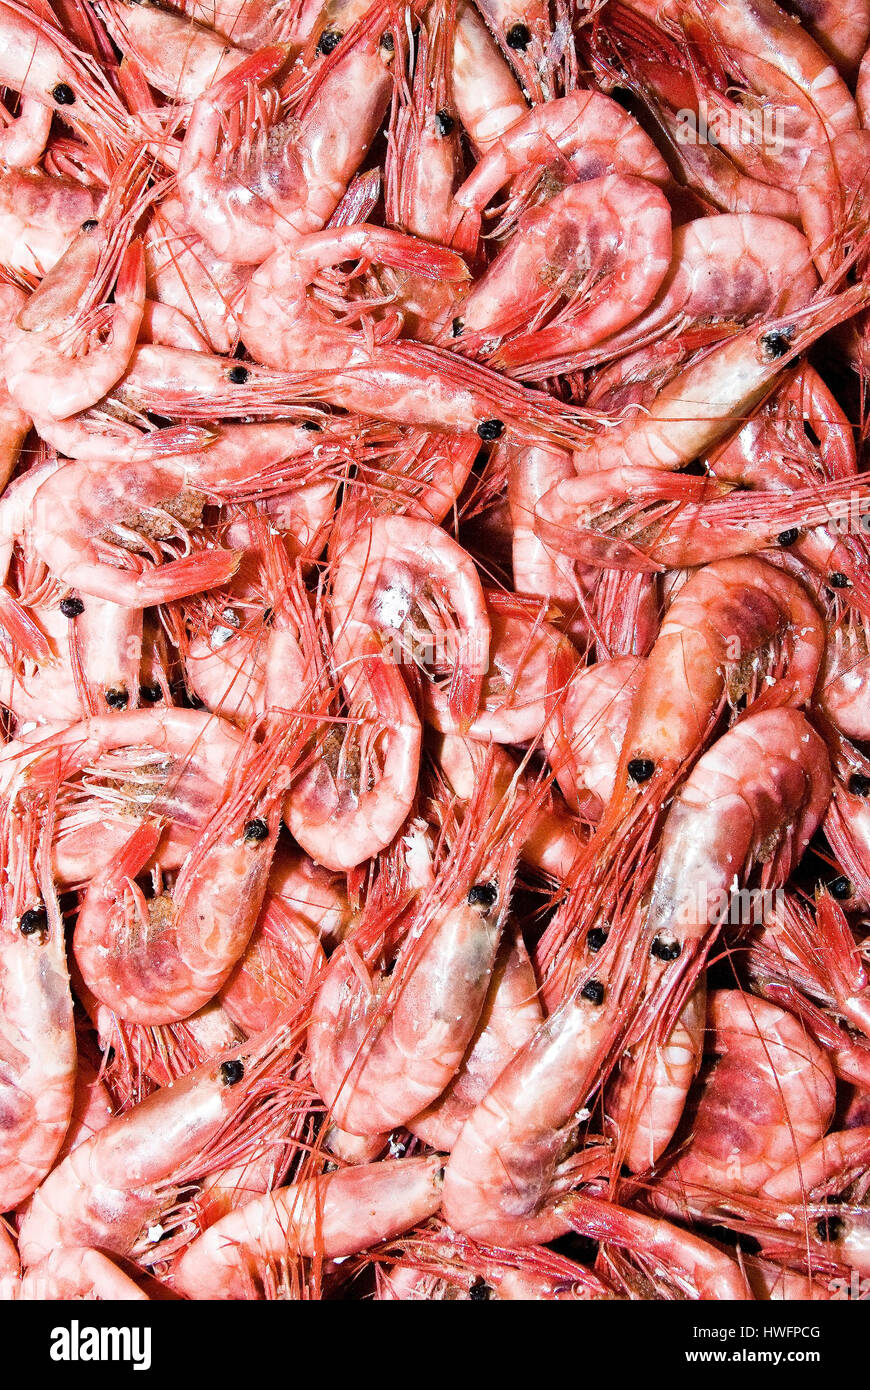 Newly boiled shrimps (Pandalus borealis) caught by trawlers off the Norwegian southern coast. Stock Photo